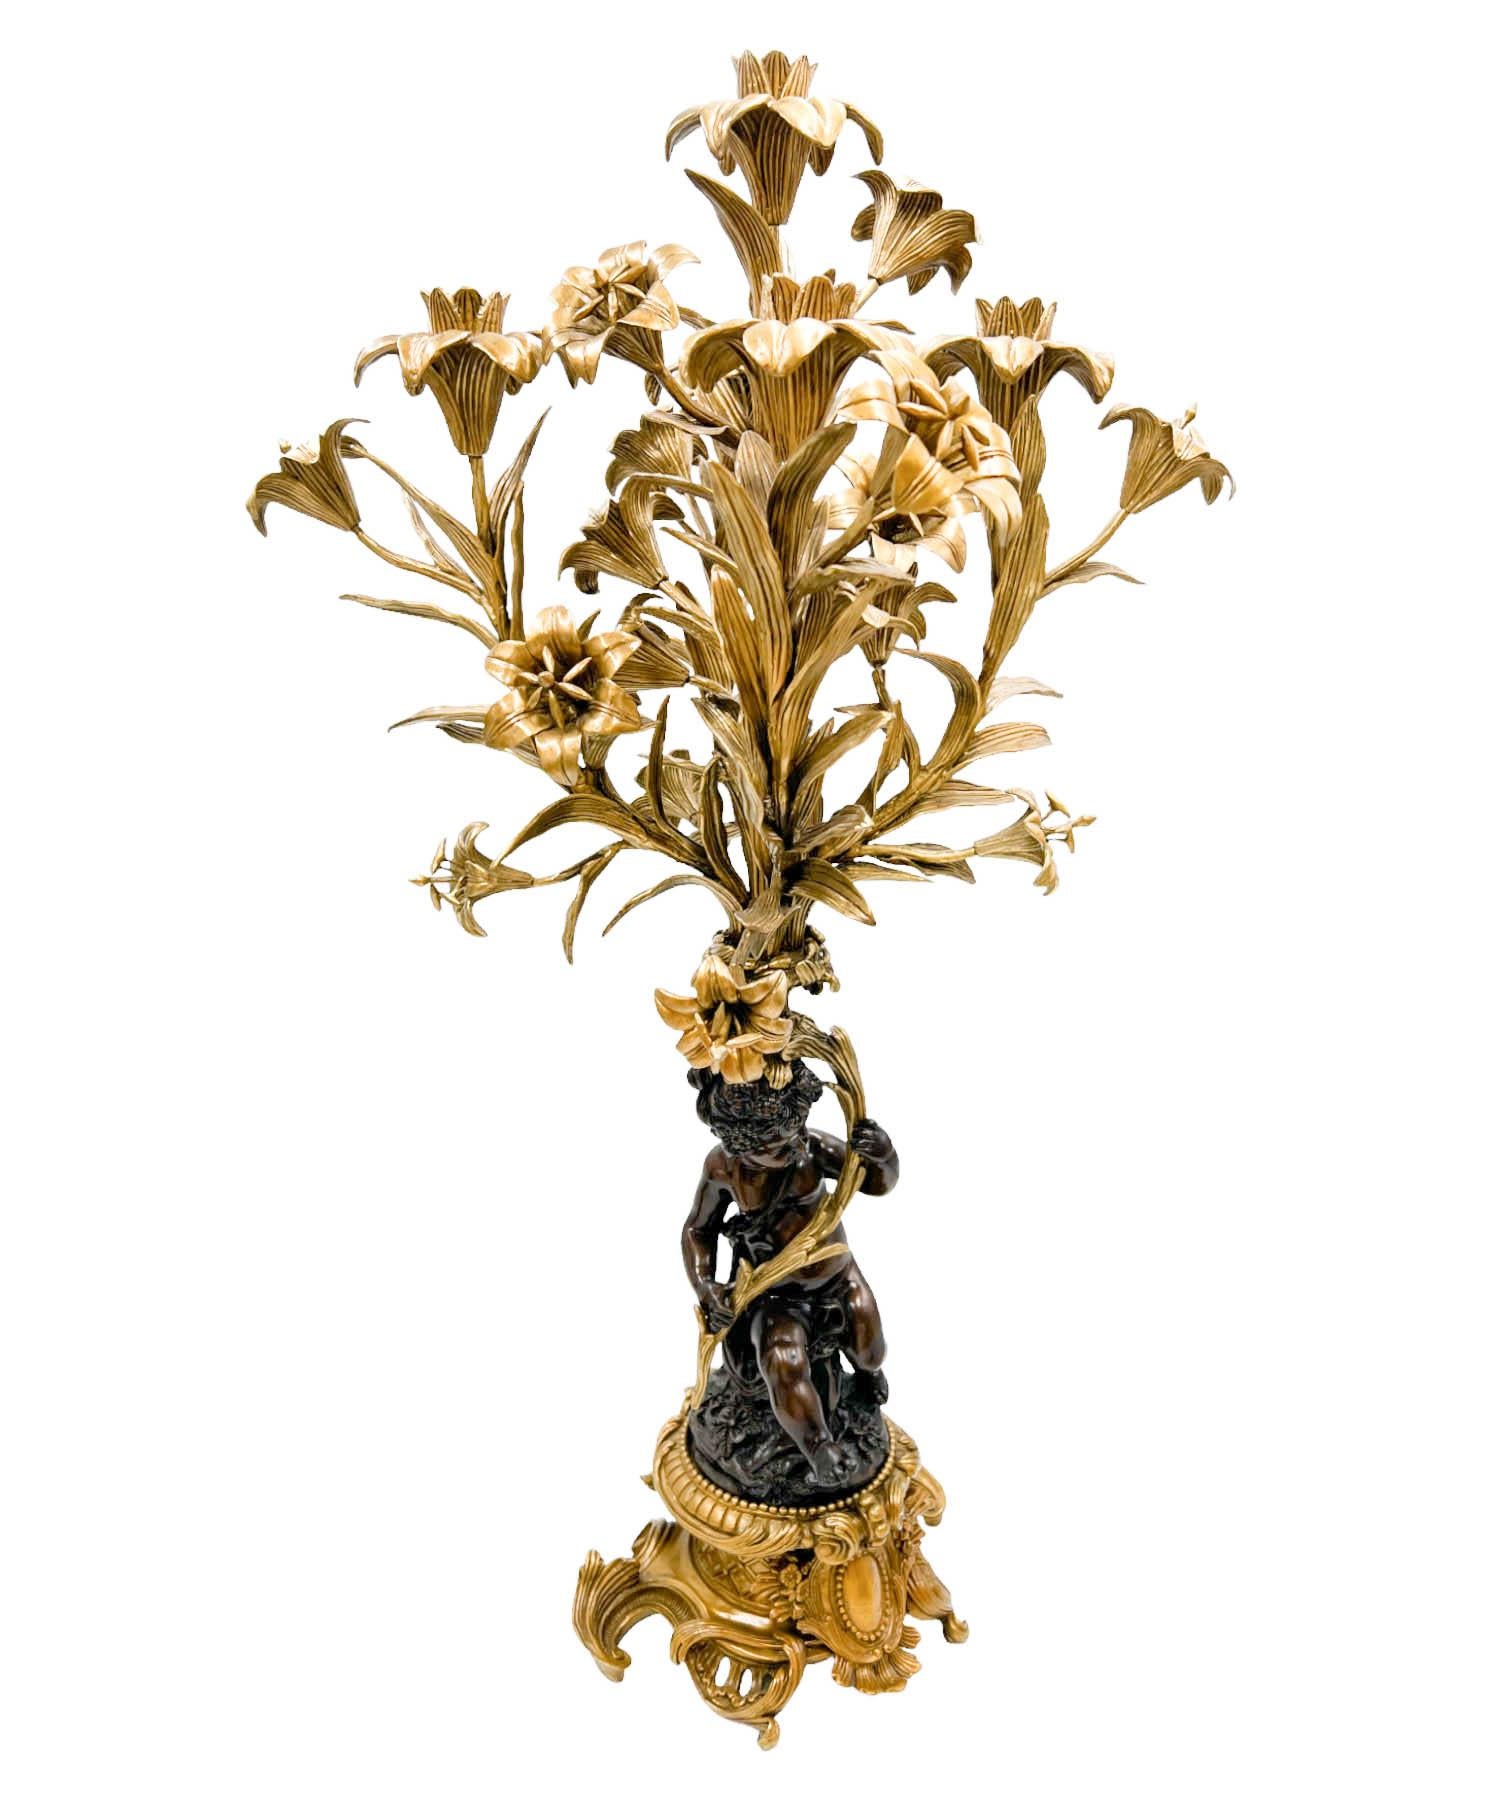 A very rare pair of Gilt Bronze Mounted Putto 5-Arm Candelabra by United Wilson.  The pair reflects the aesthetics of the Rococo period, characterized by neoclassical influences, ornate detailing, and elegant design elements.  Each candelabra 